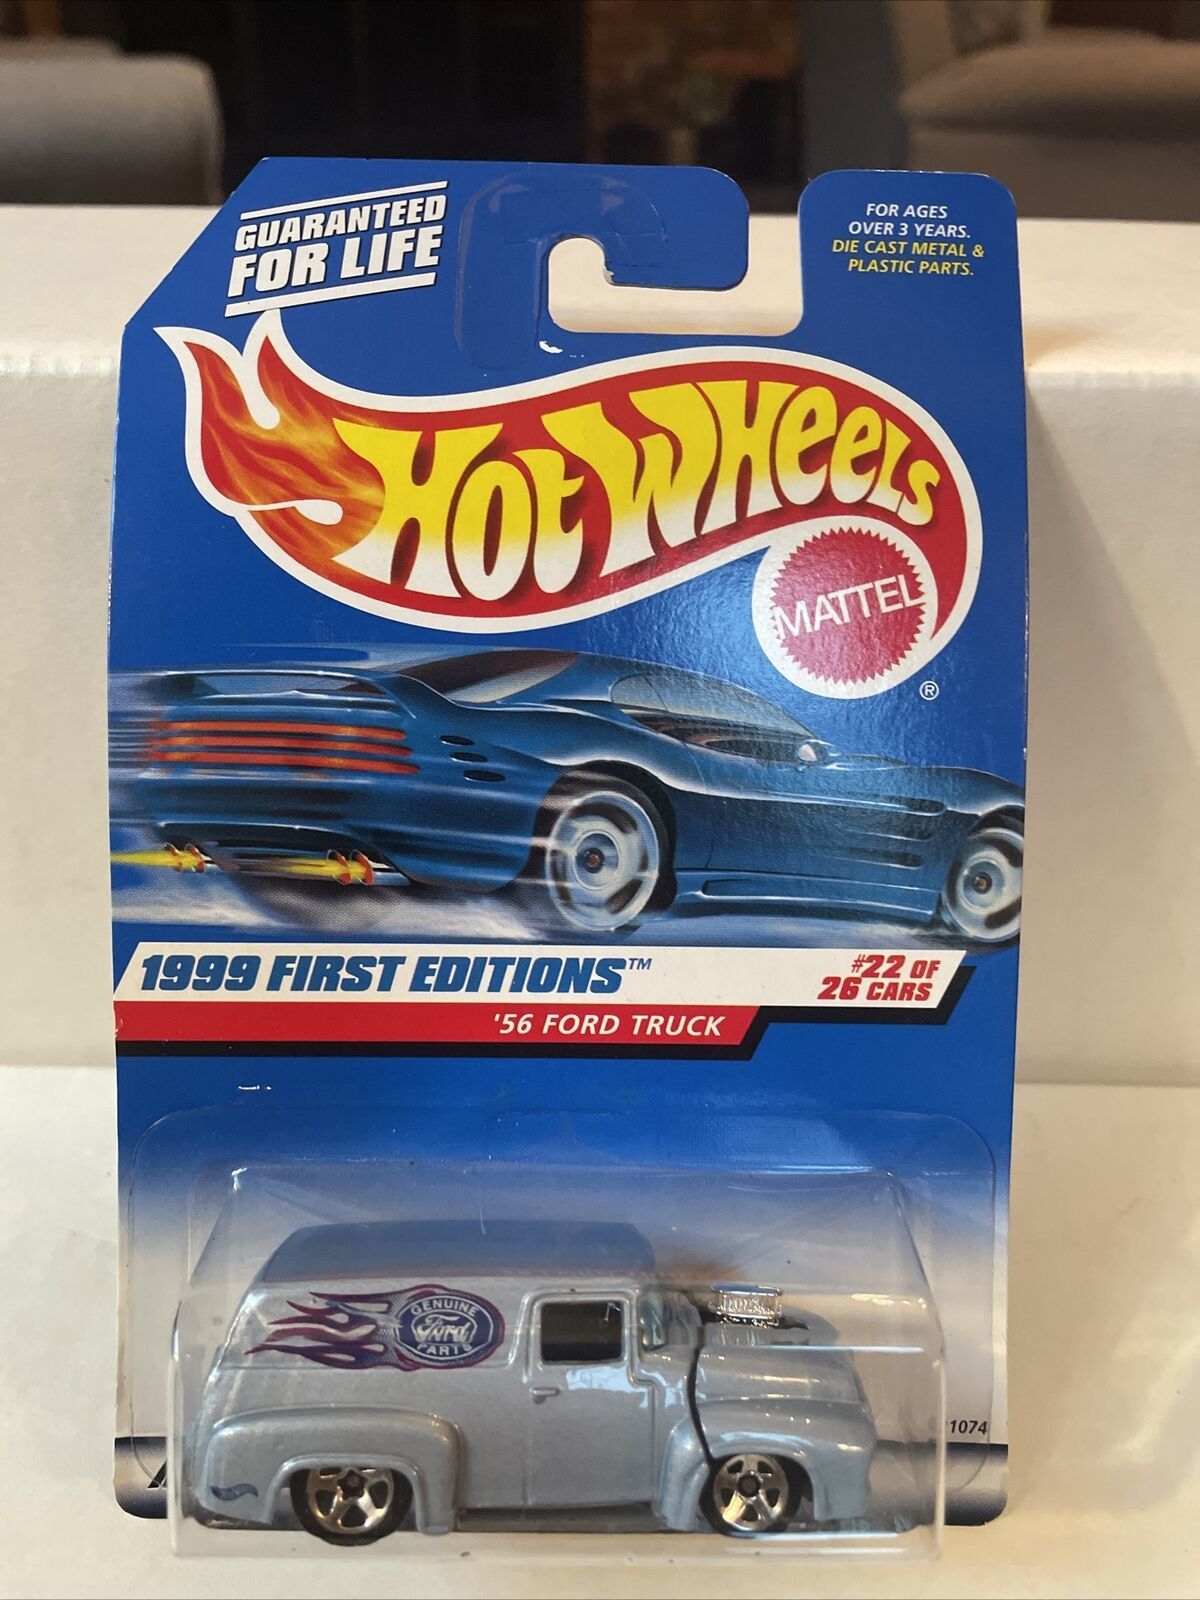 Primary image for 1999 Hot Wheels #927 First Editions 22/26 '56 FORD TRUCK Light Blue w/Chrome 5Sp